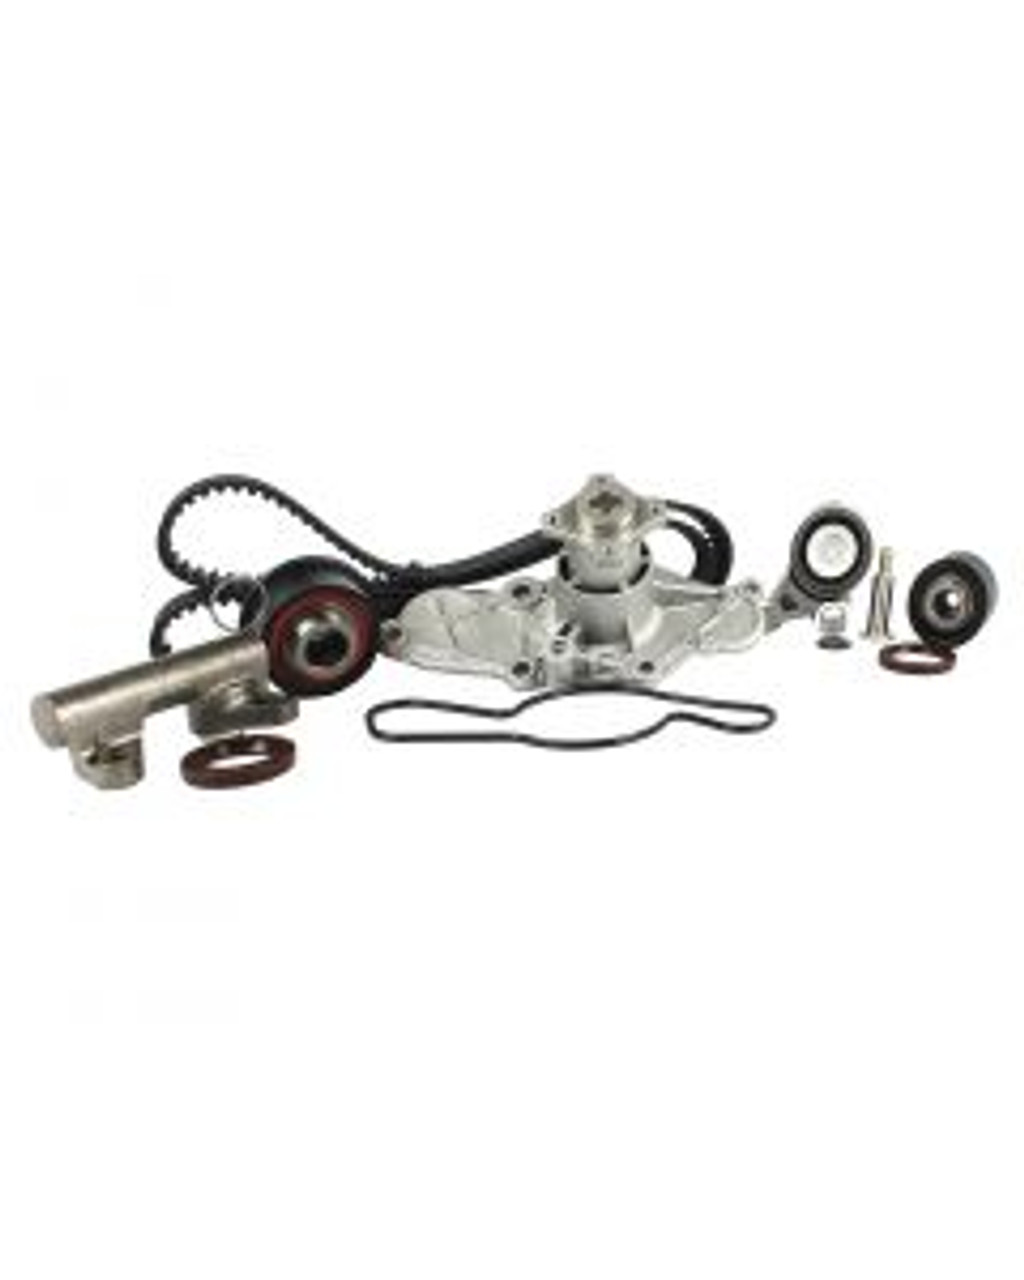 Timing Belt Kit with Water Pump 2.5L 2001 Mazda 626 - TBK455WP.12